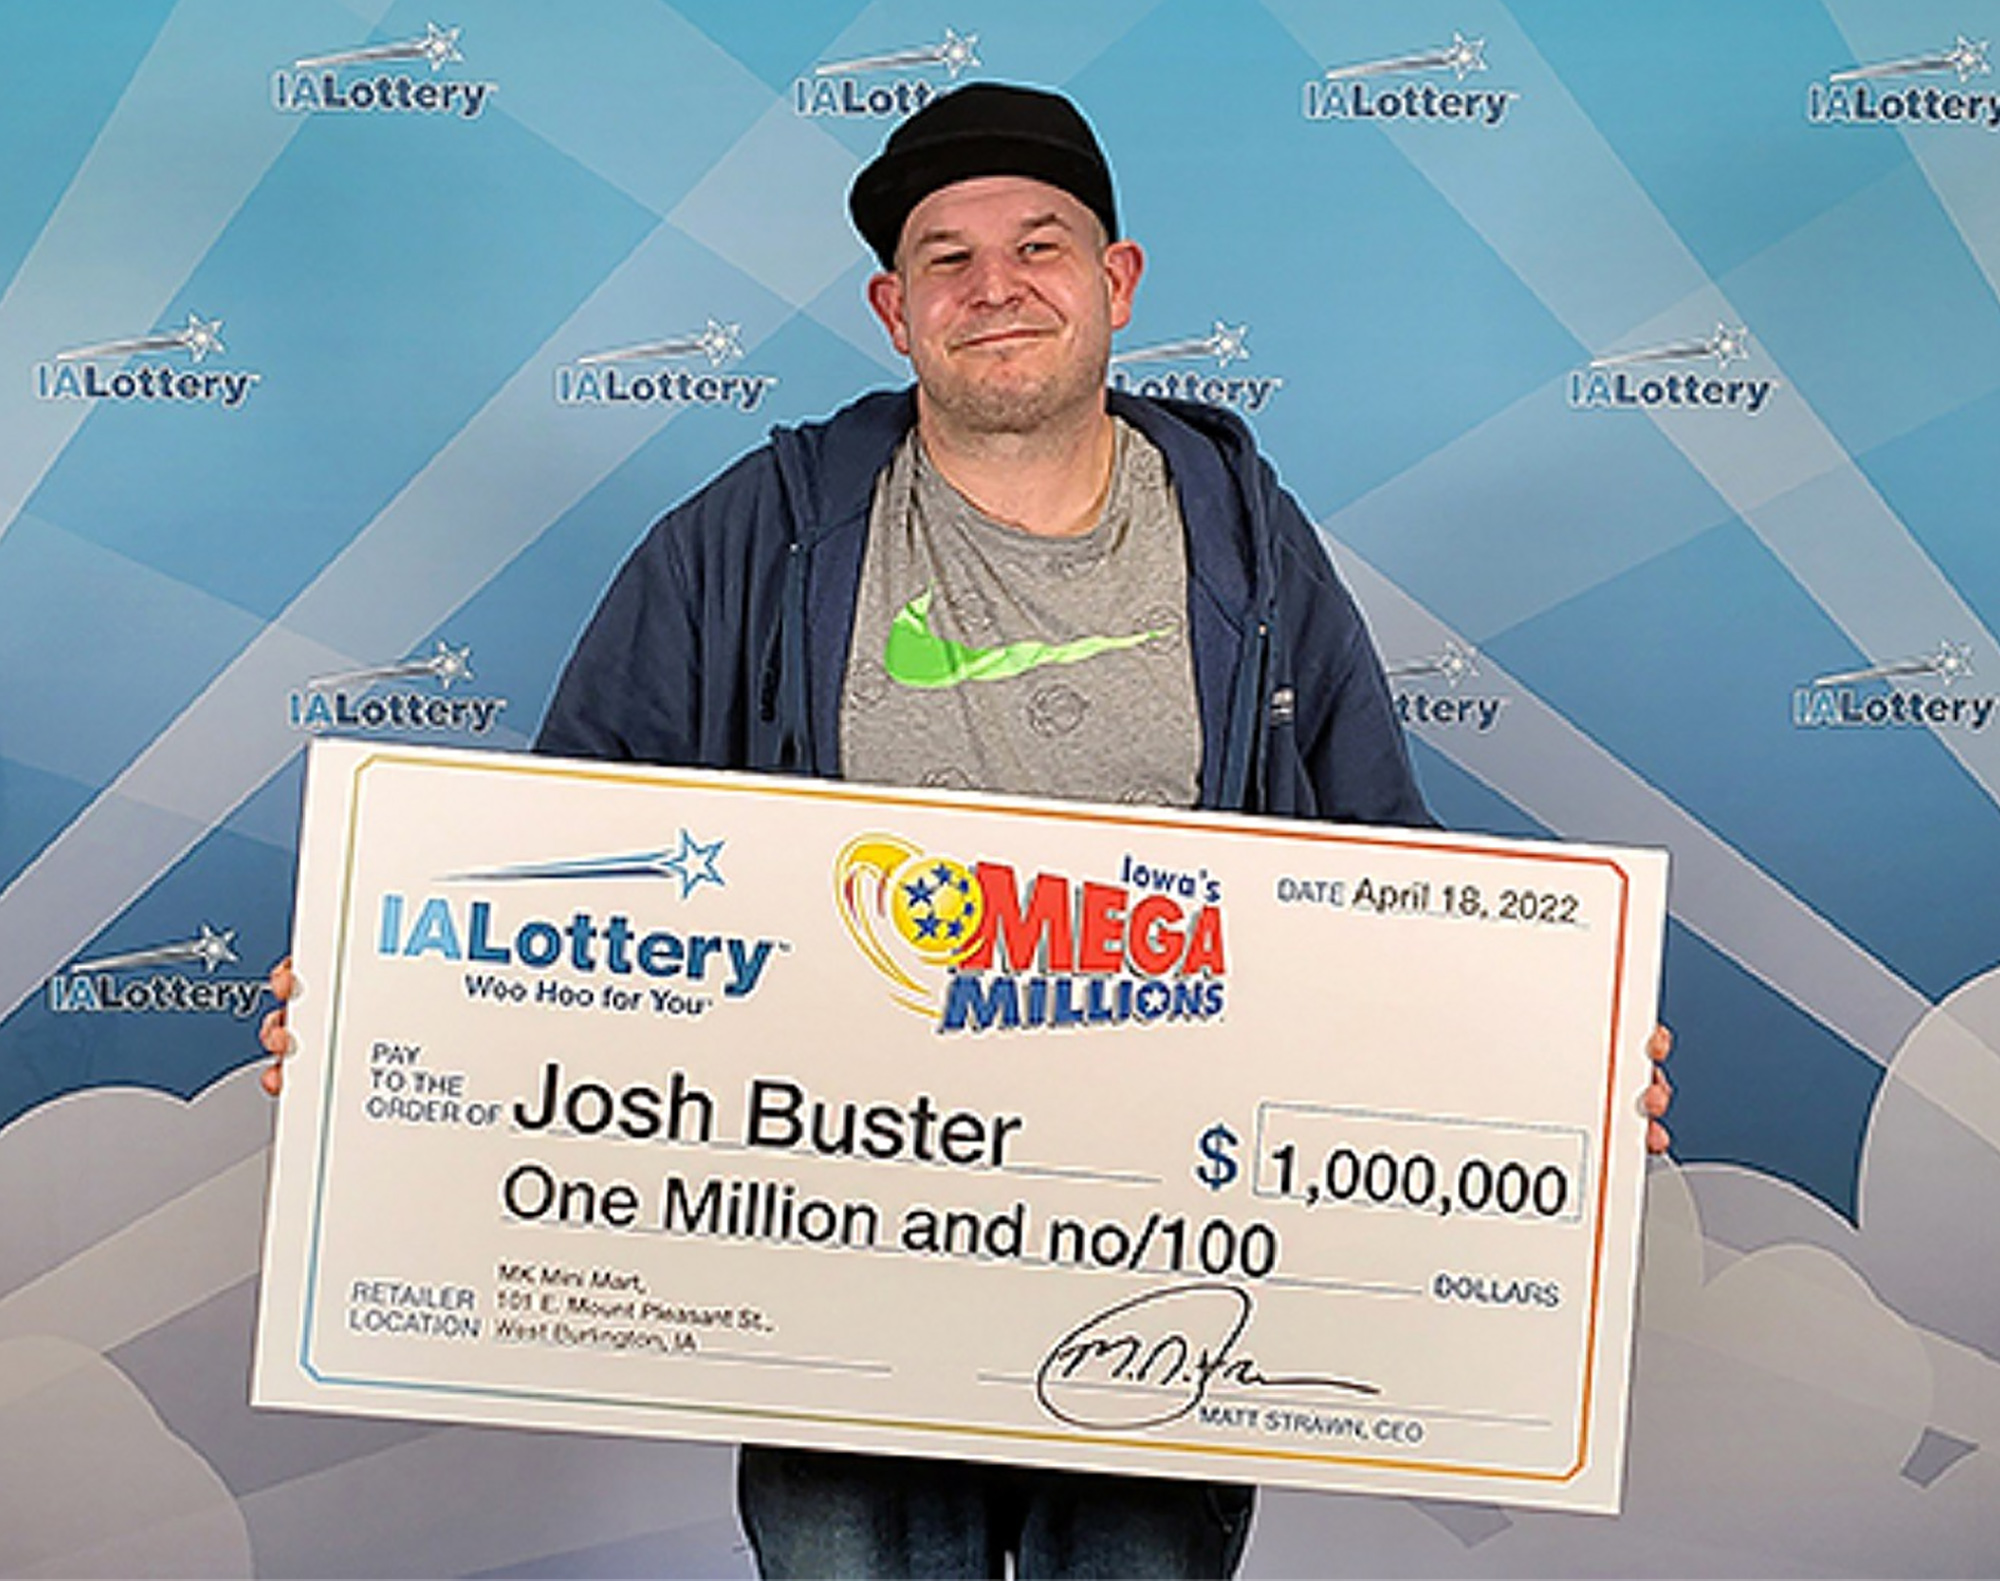 West Burlington man Josh Buster won $1M after lottery ticket-printing mistake in April 2022. (IALottery/Zenger).